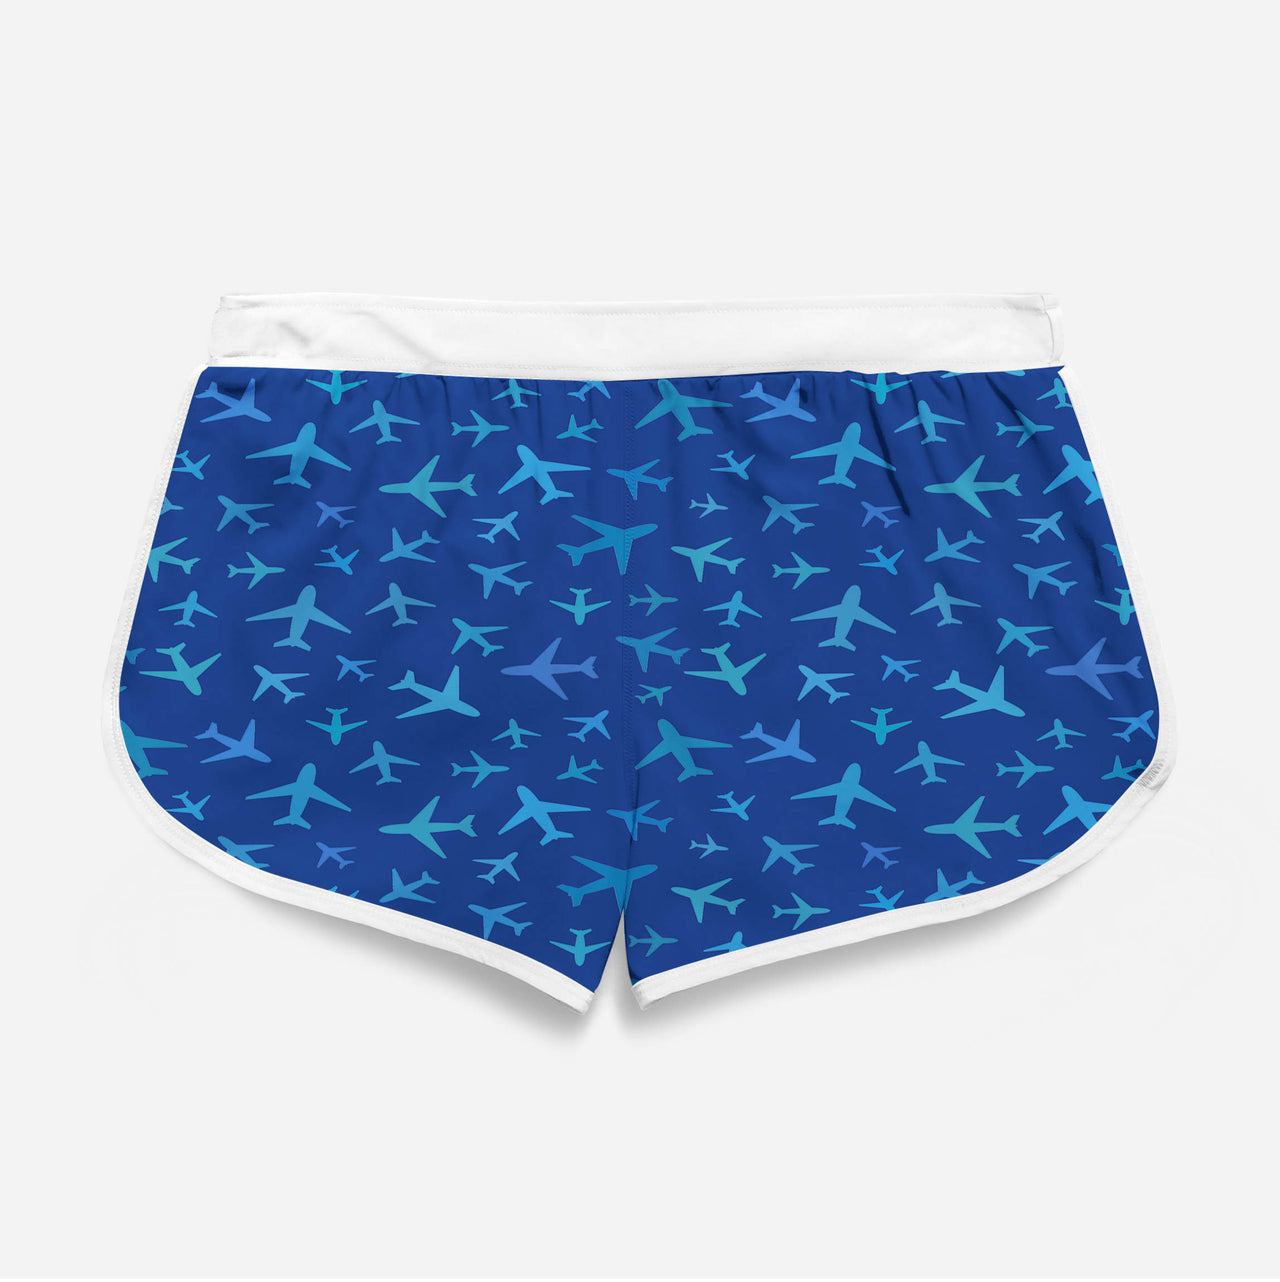 Many Airplanes Blue Designed Women Beach Style Shorts